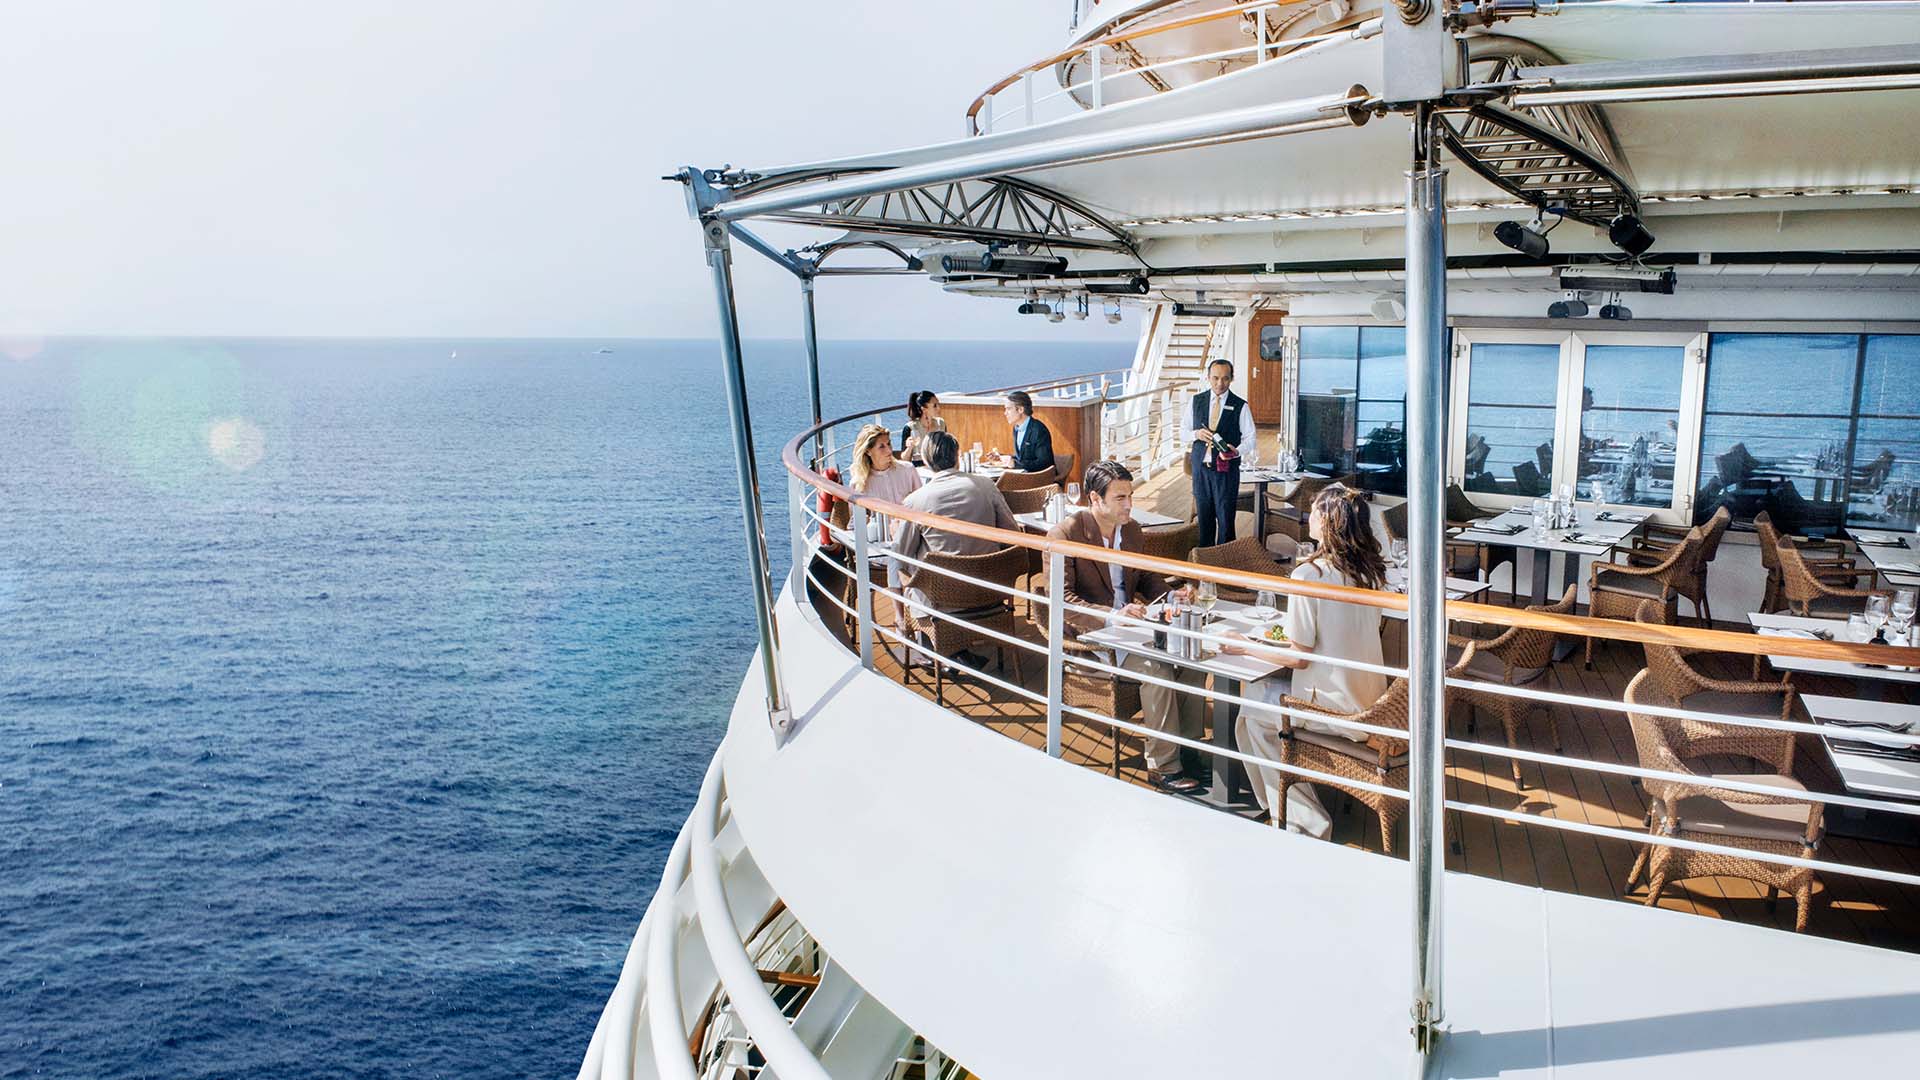 Silversea — returns to Asia in style